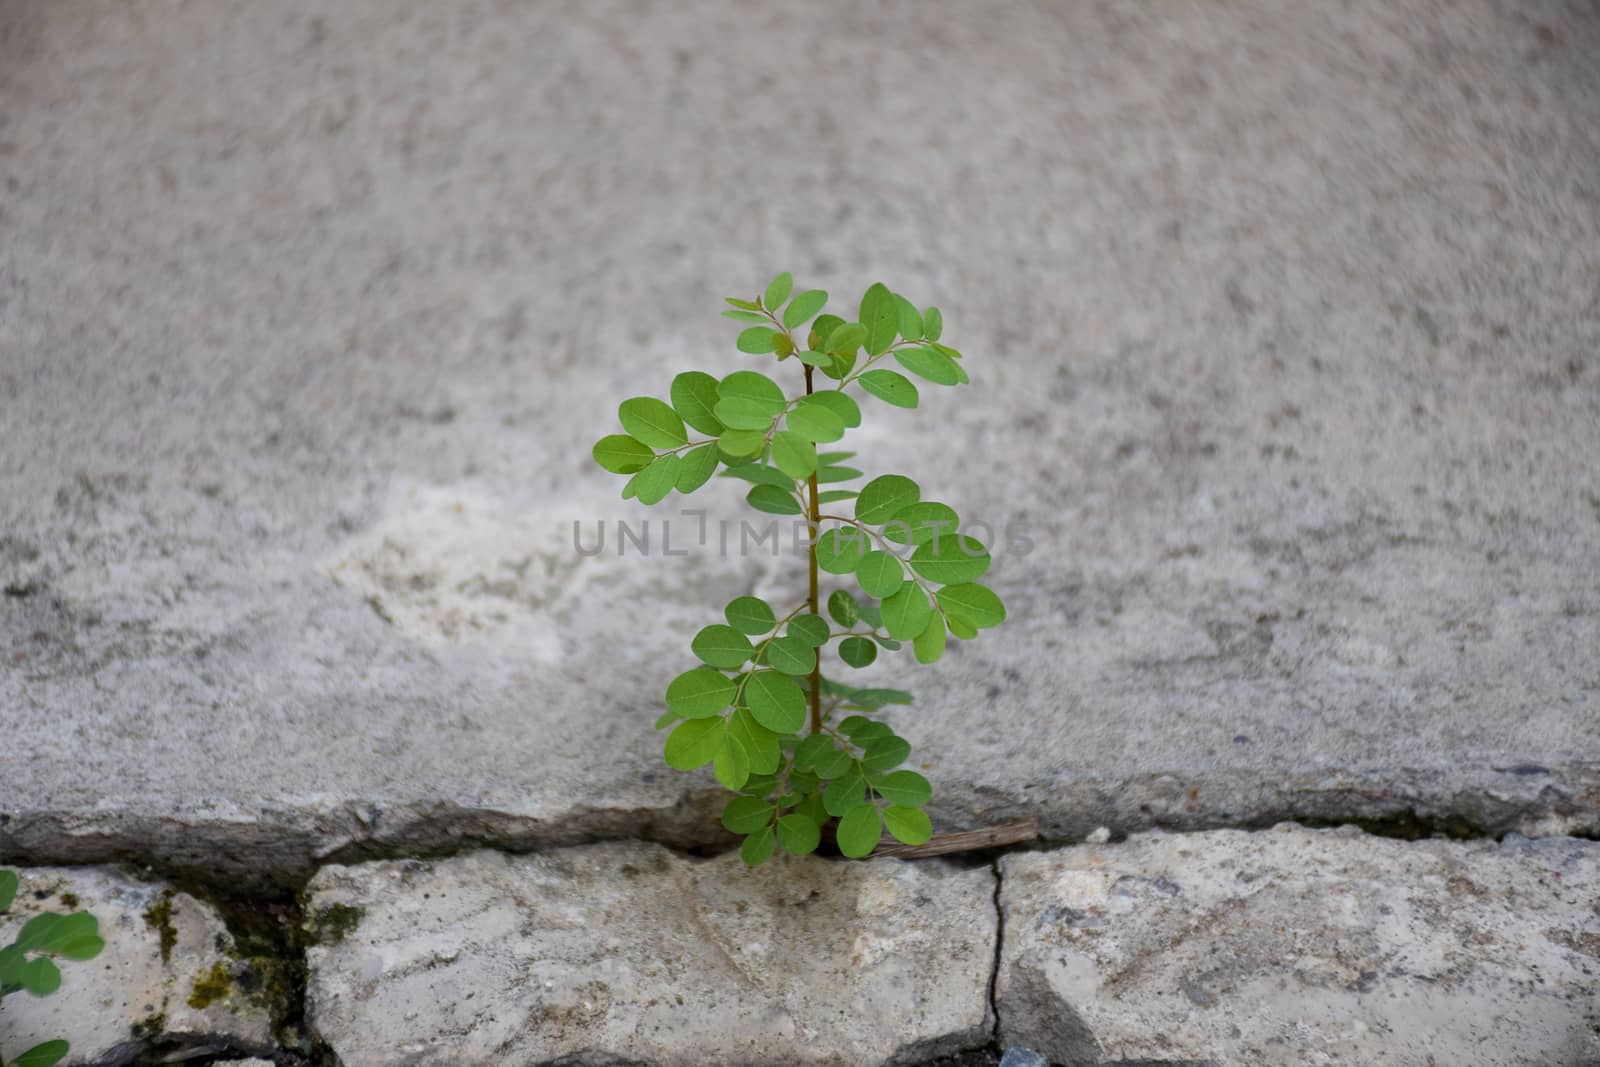 Plants/seedling taking root on Concrete floor. motivation and strength conceptual.